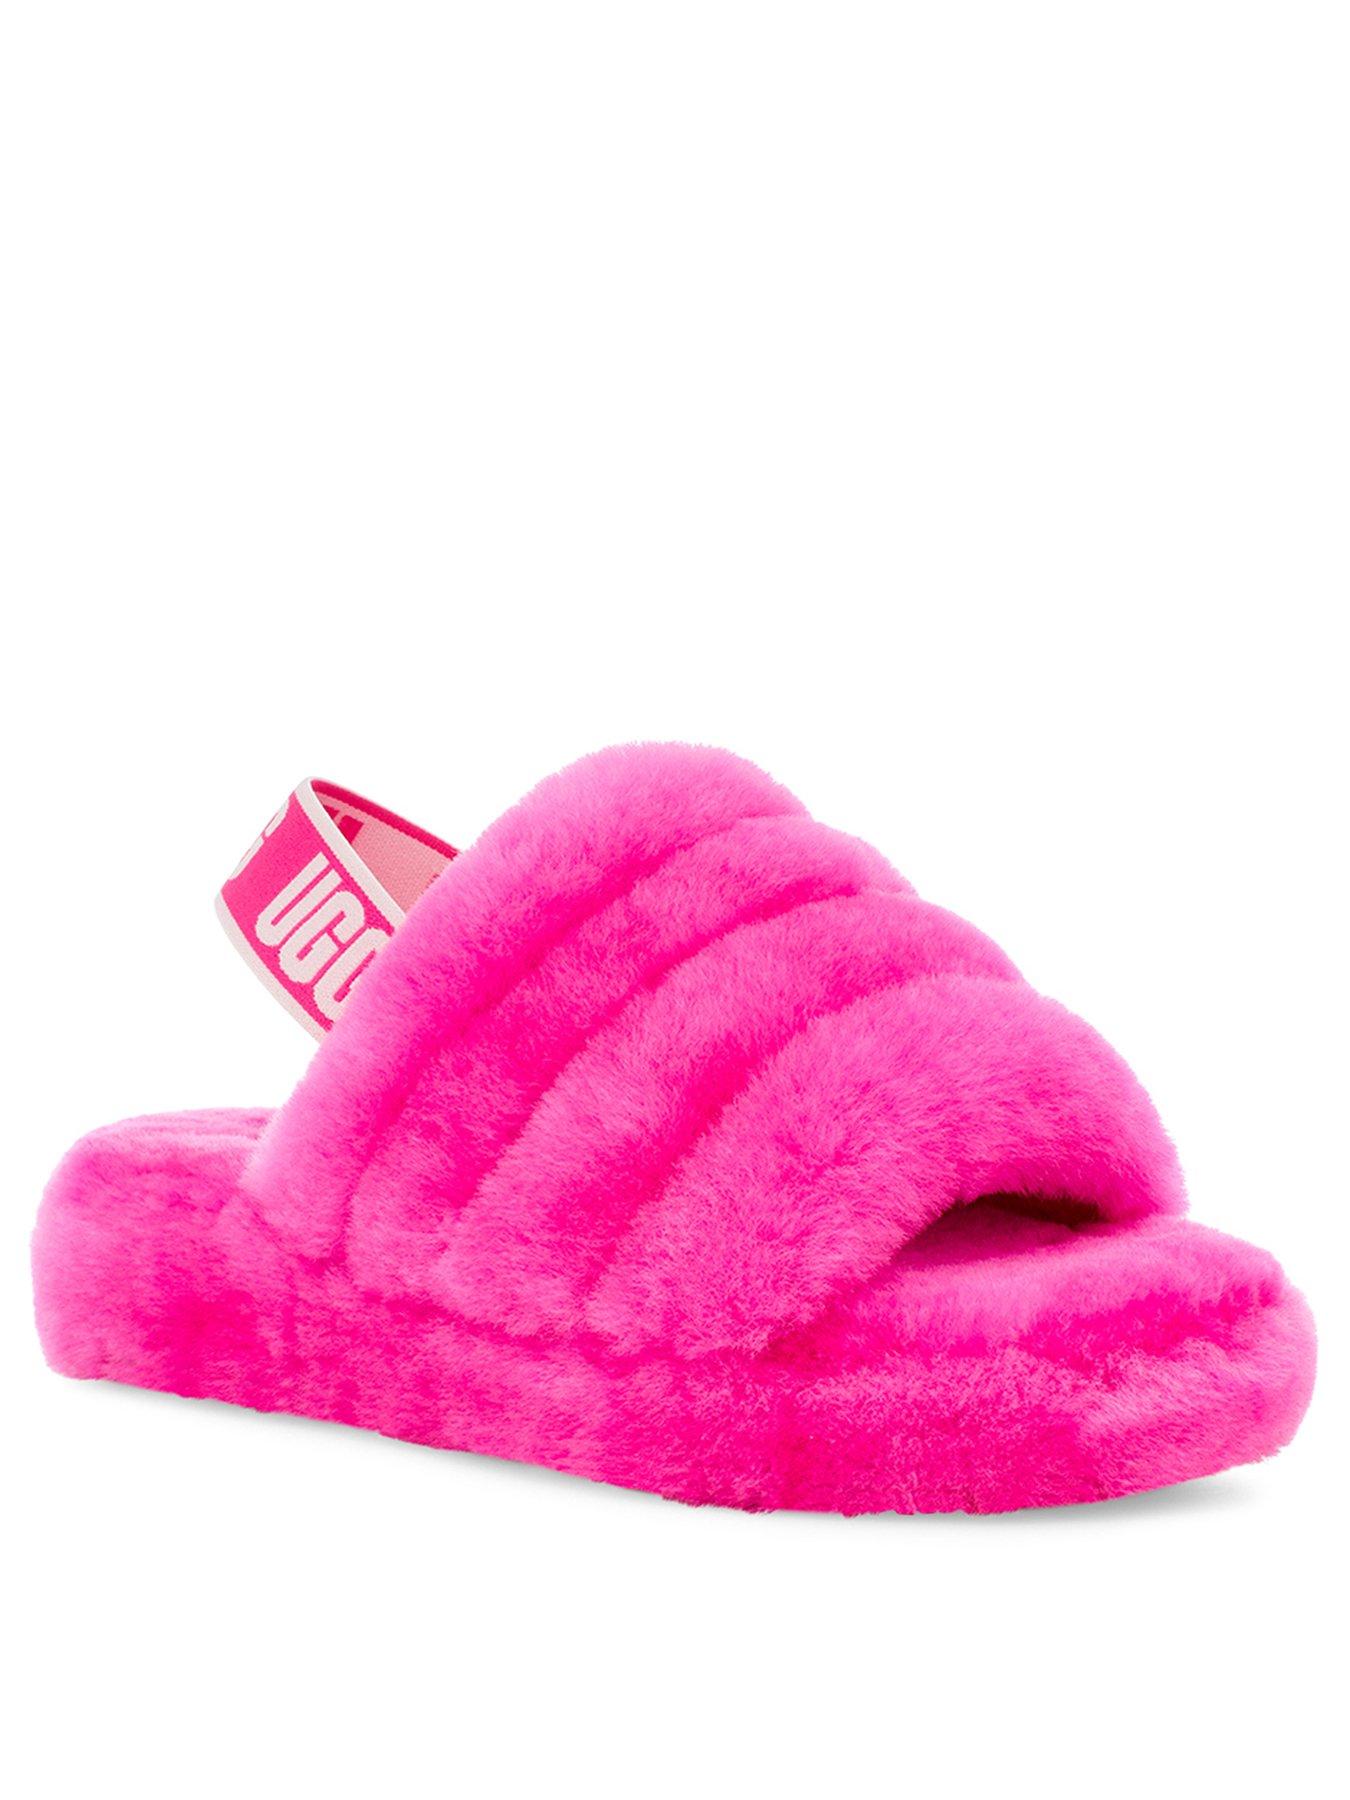 uggs slippers pink